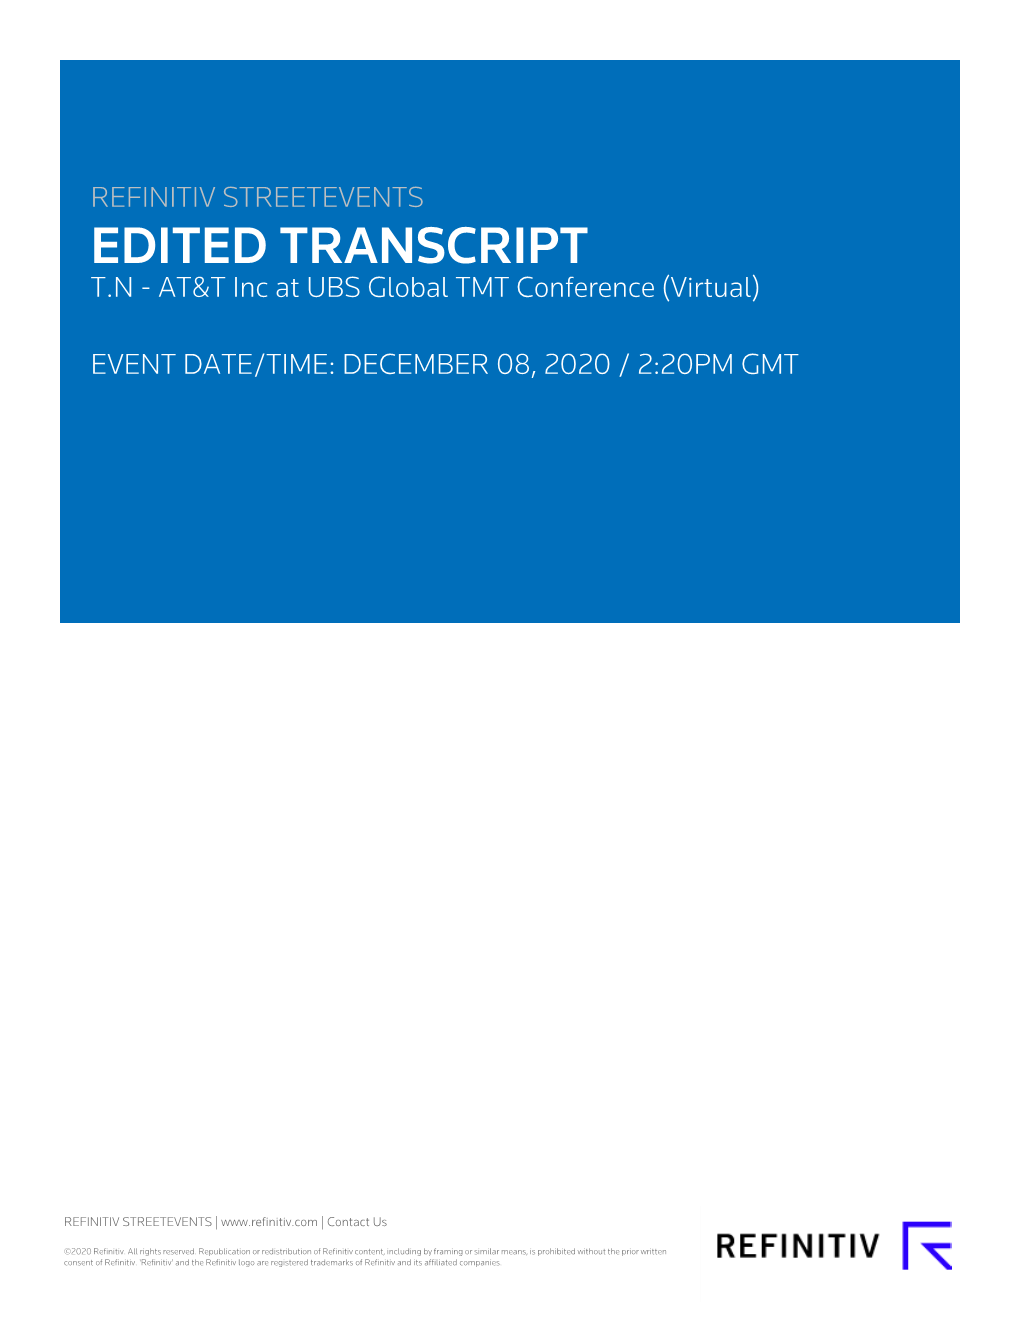 EDITED TRANSCRIPT T.N - AT&T Inc at UBS Global TMT Conference (Virtual)